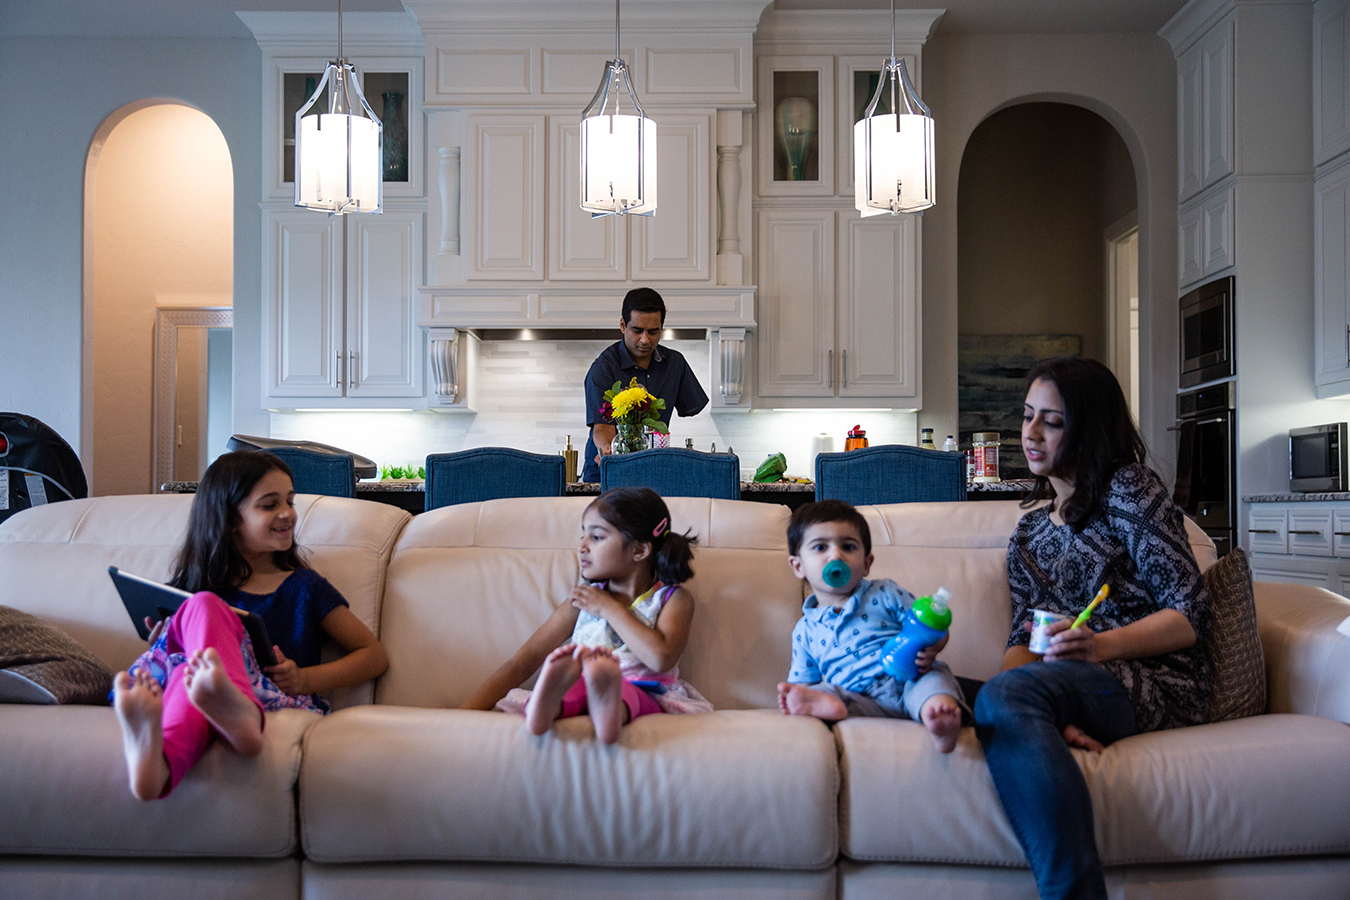 Khan cooks lunch for his wife, Ayesha, and children, Nazneen, 7, Yasmeen, 4, and Rehan, 1, in their home in Southlake, Texas.